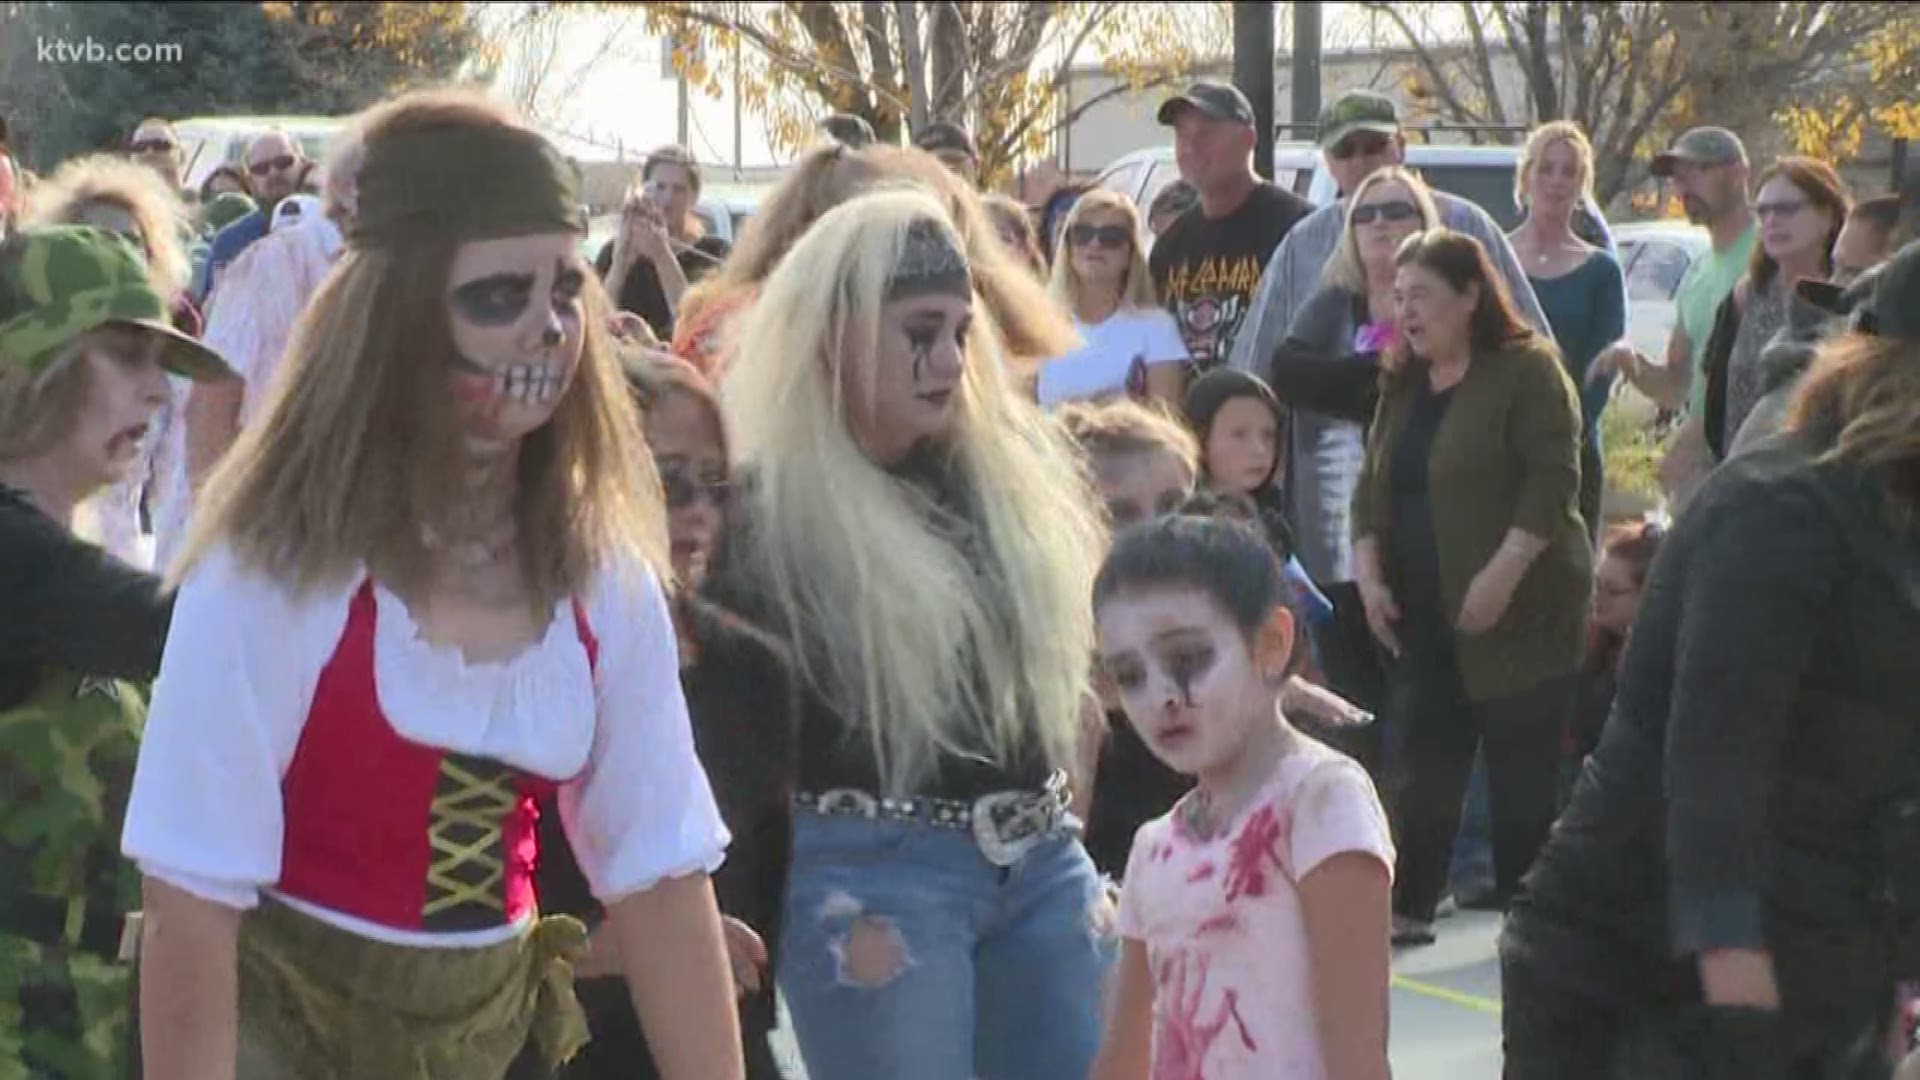 On Saturday, October 27, 2018, in Boise, Idaho, dozens of people lived their dream of performing the "Thriller" dance, as seen in the classic Michael Jackson video.